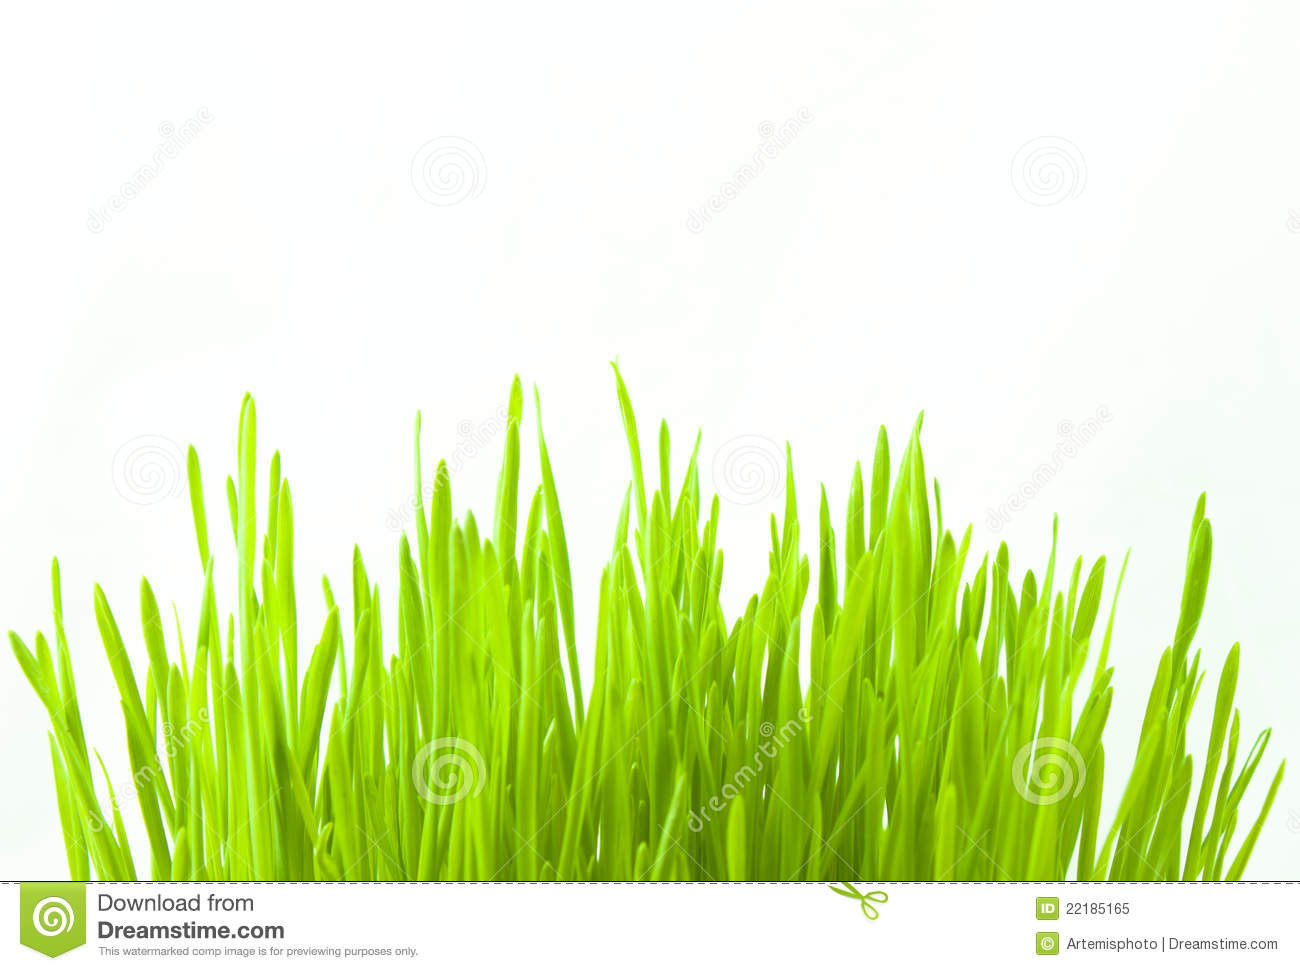 Free Pictures of Wheat Grass